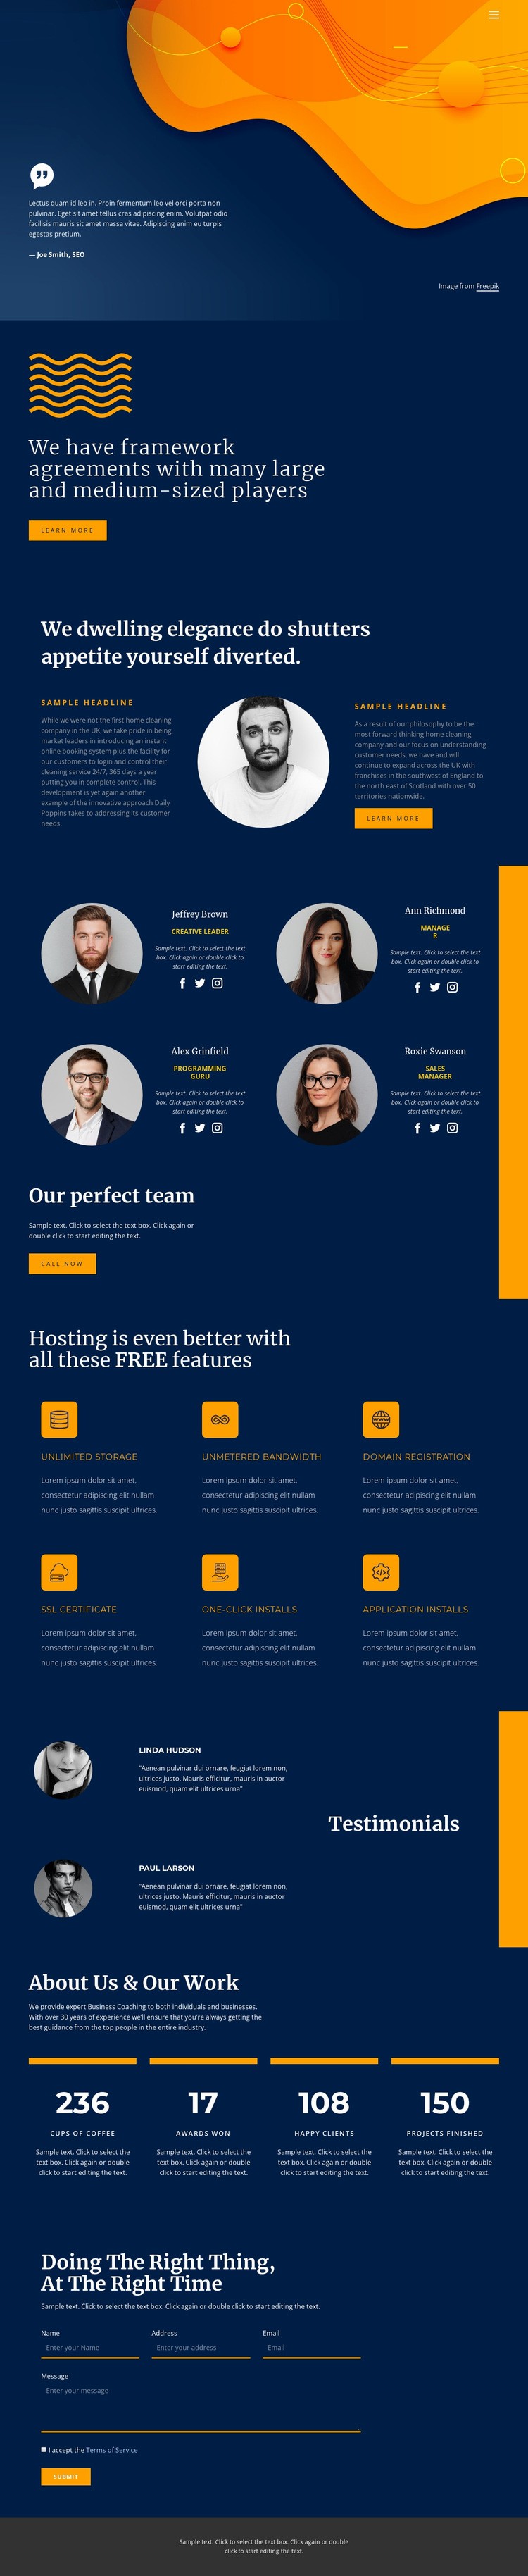 Quality, speed and result Homepage Design